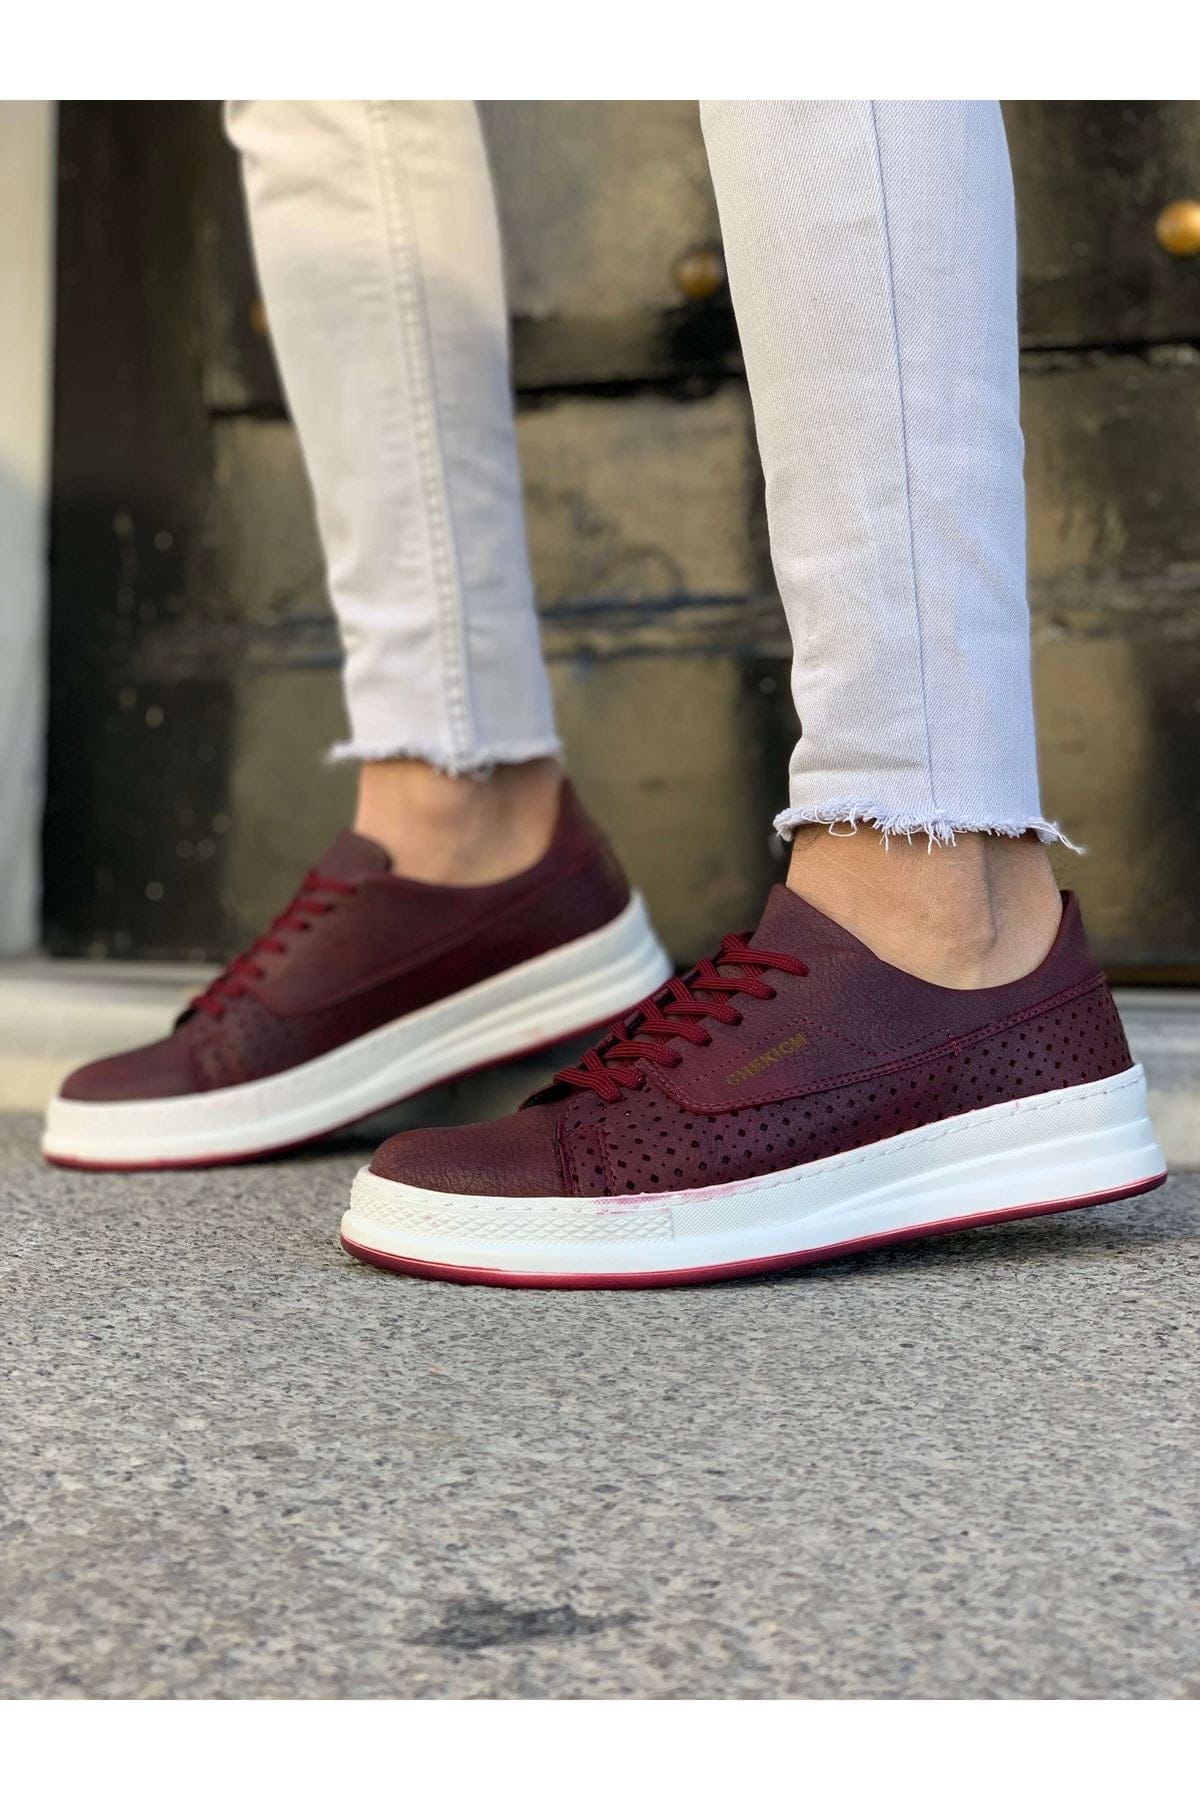 
                  
                    Men's Lace-up Claret Red Shoes ch043 - OUTFITLIFT
                  
                